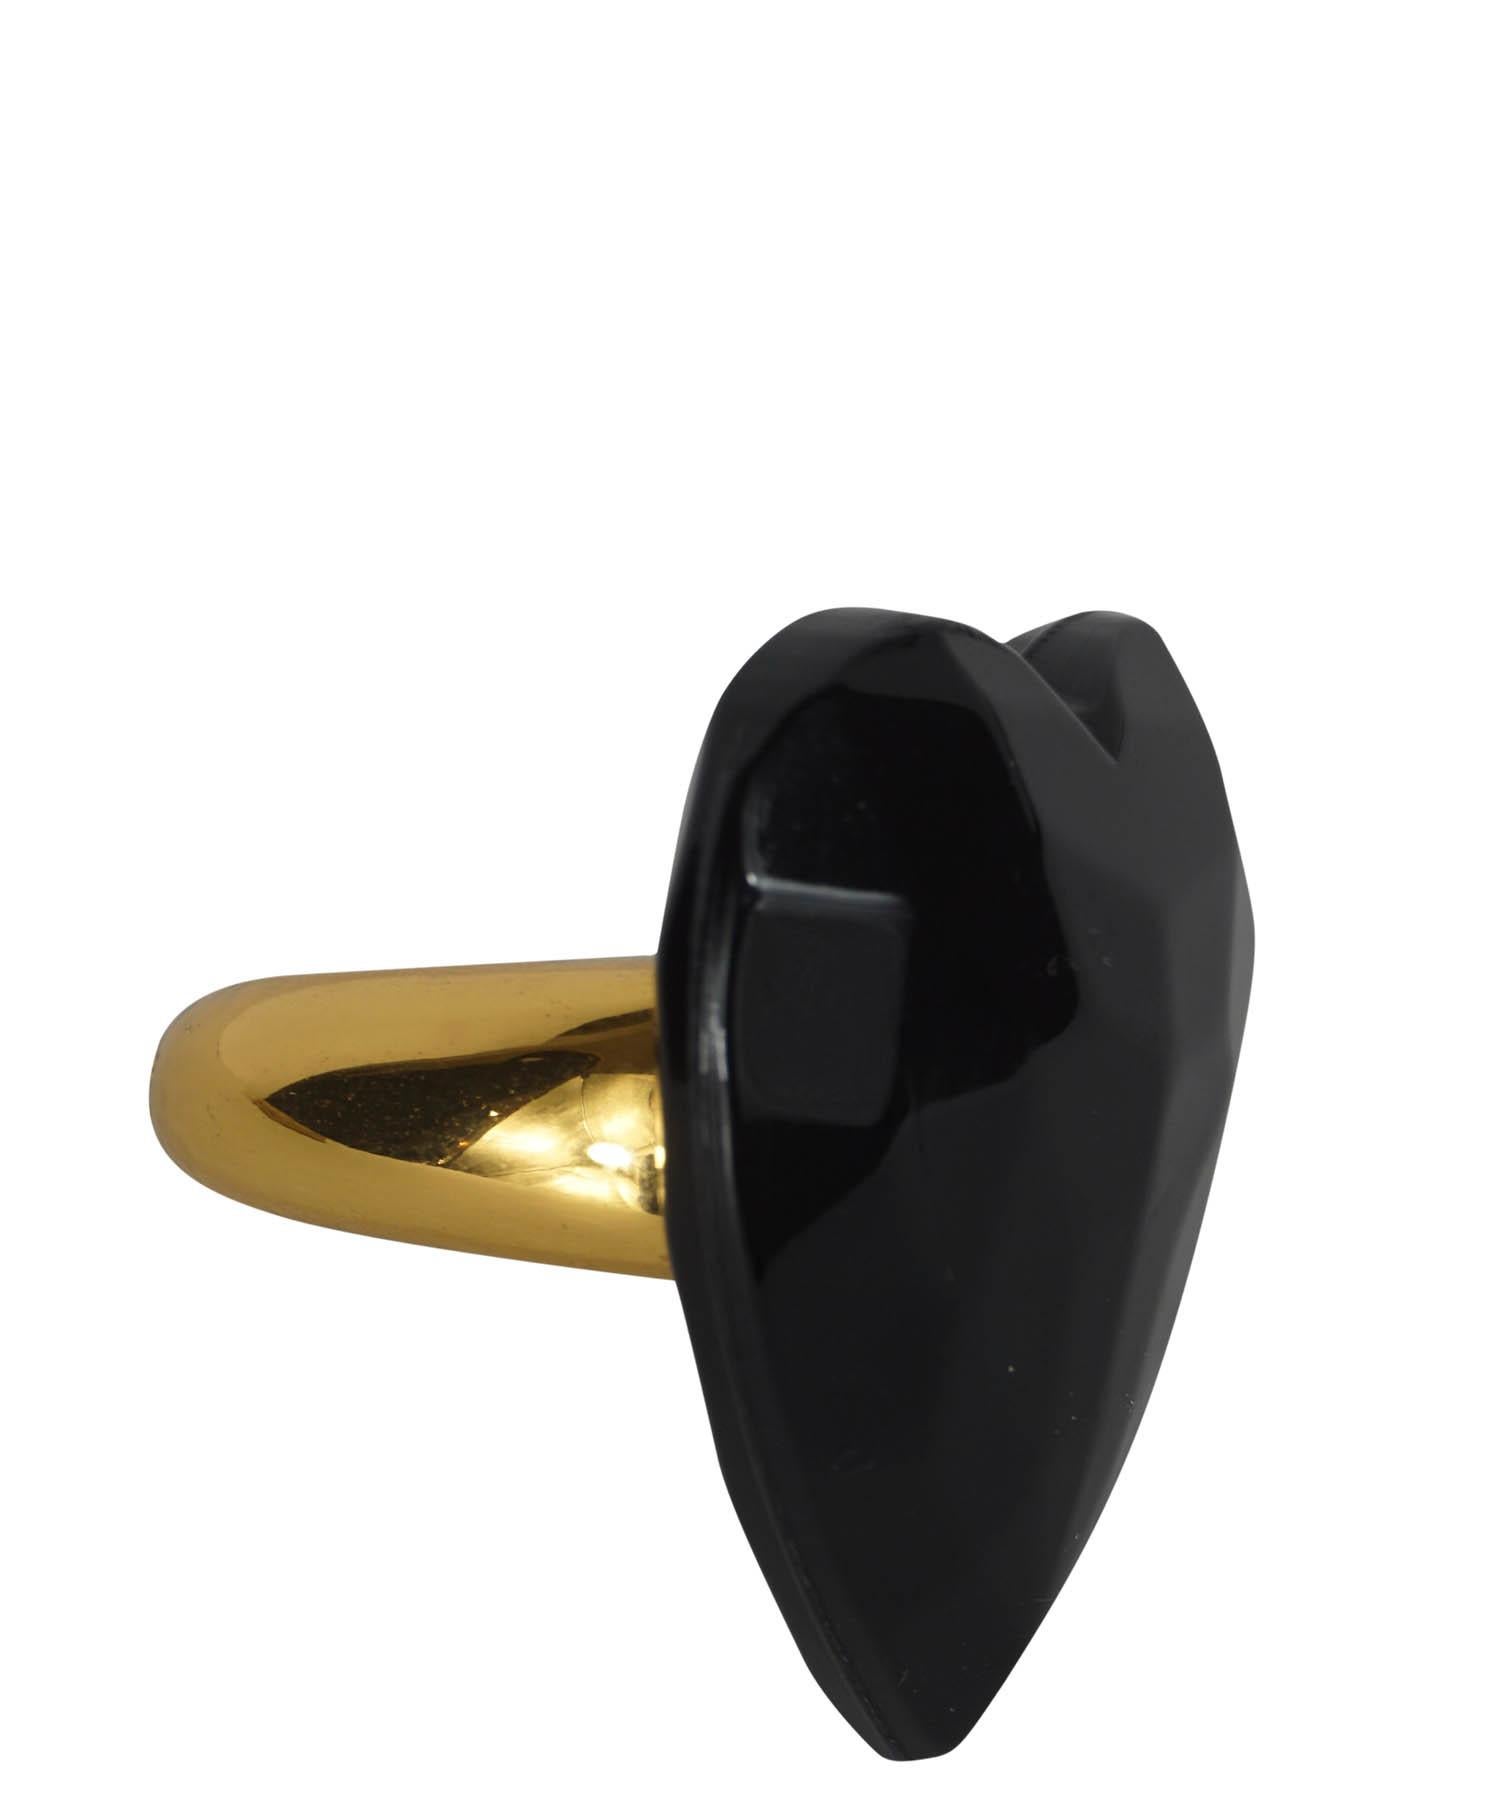 Yves Saint Laurent vintage statement ring, dating back to the 1980's, features a massive black faceted resin heart on a thick gold-tone band. Designer size 7. Made in France. Heart width: 1.5